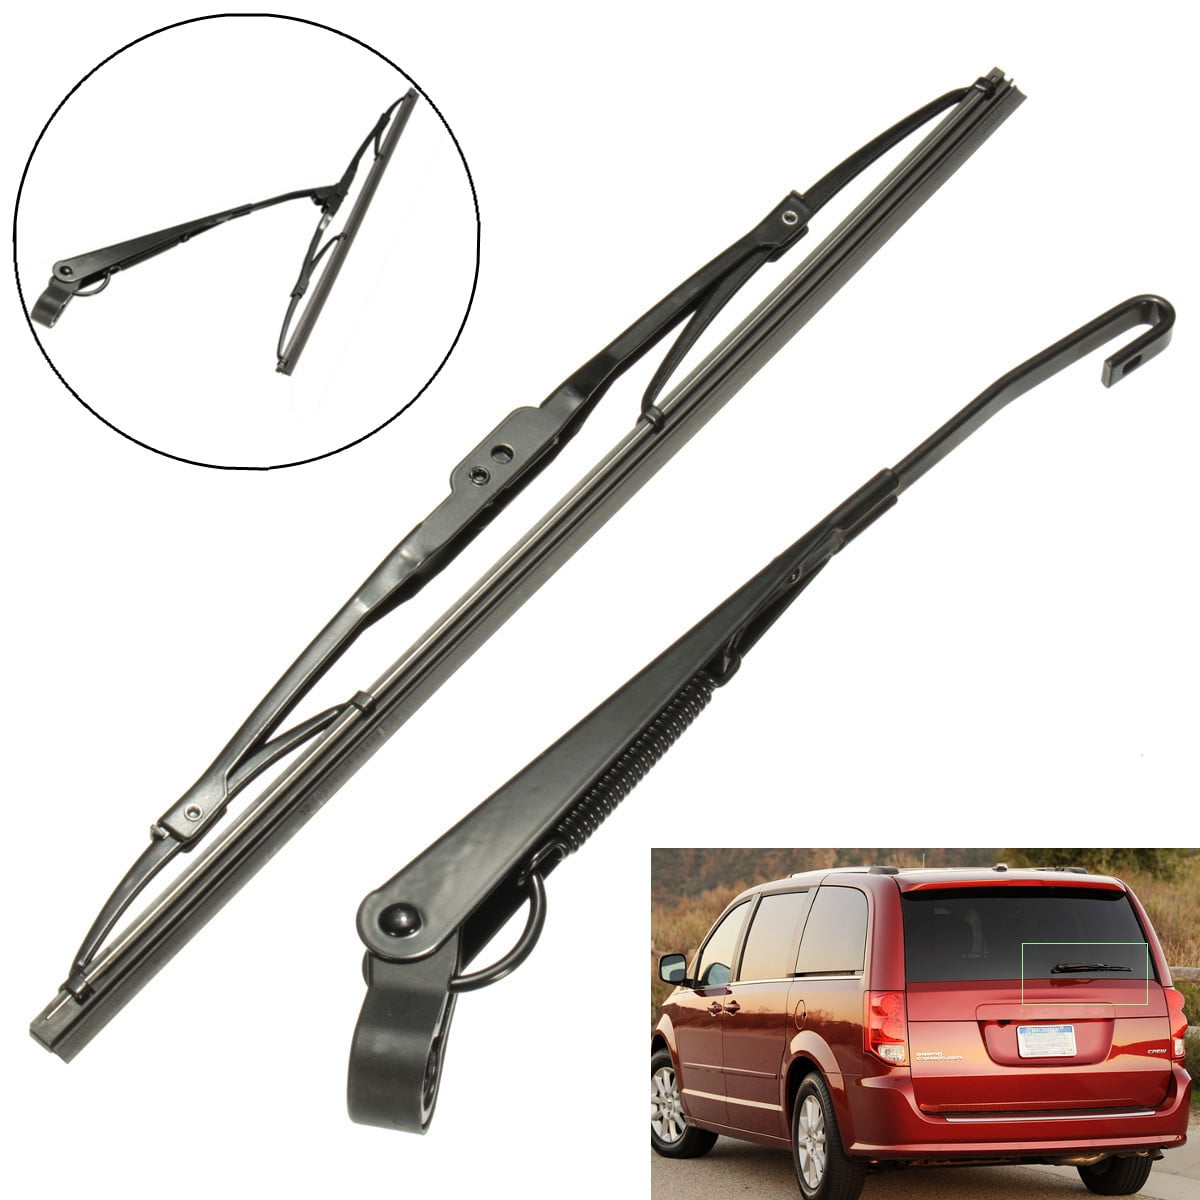 Car Rear Window Windscreen Wiper Arm Blade Stainless Steel Fits For Dodge Grand Caravan Town 2010 Town And Country Wiper Blade Size